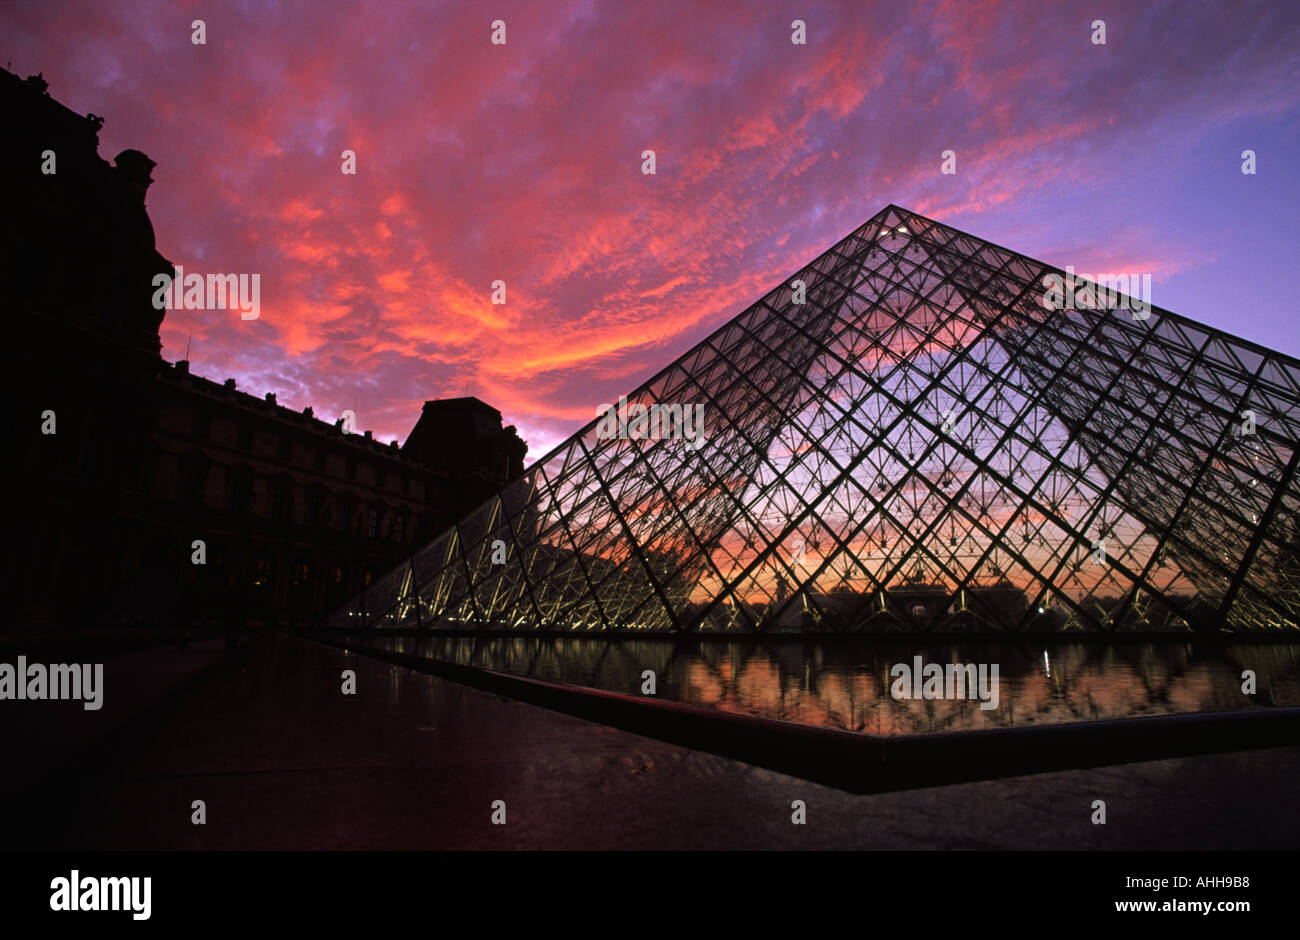 Red sky above The Pyramide at sunset at the Louvre in Paris France Stock Photo